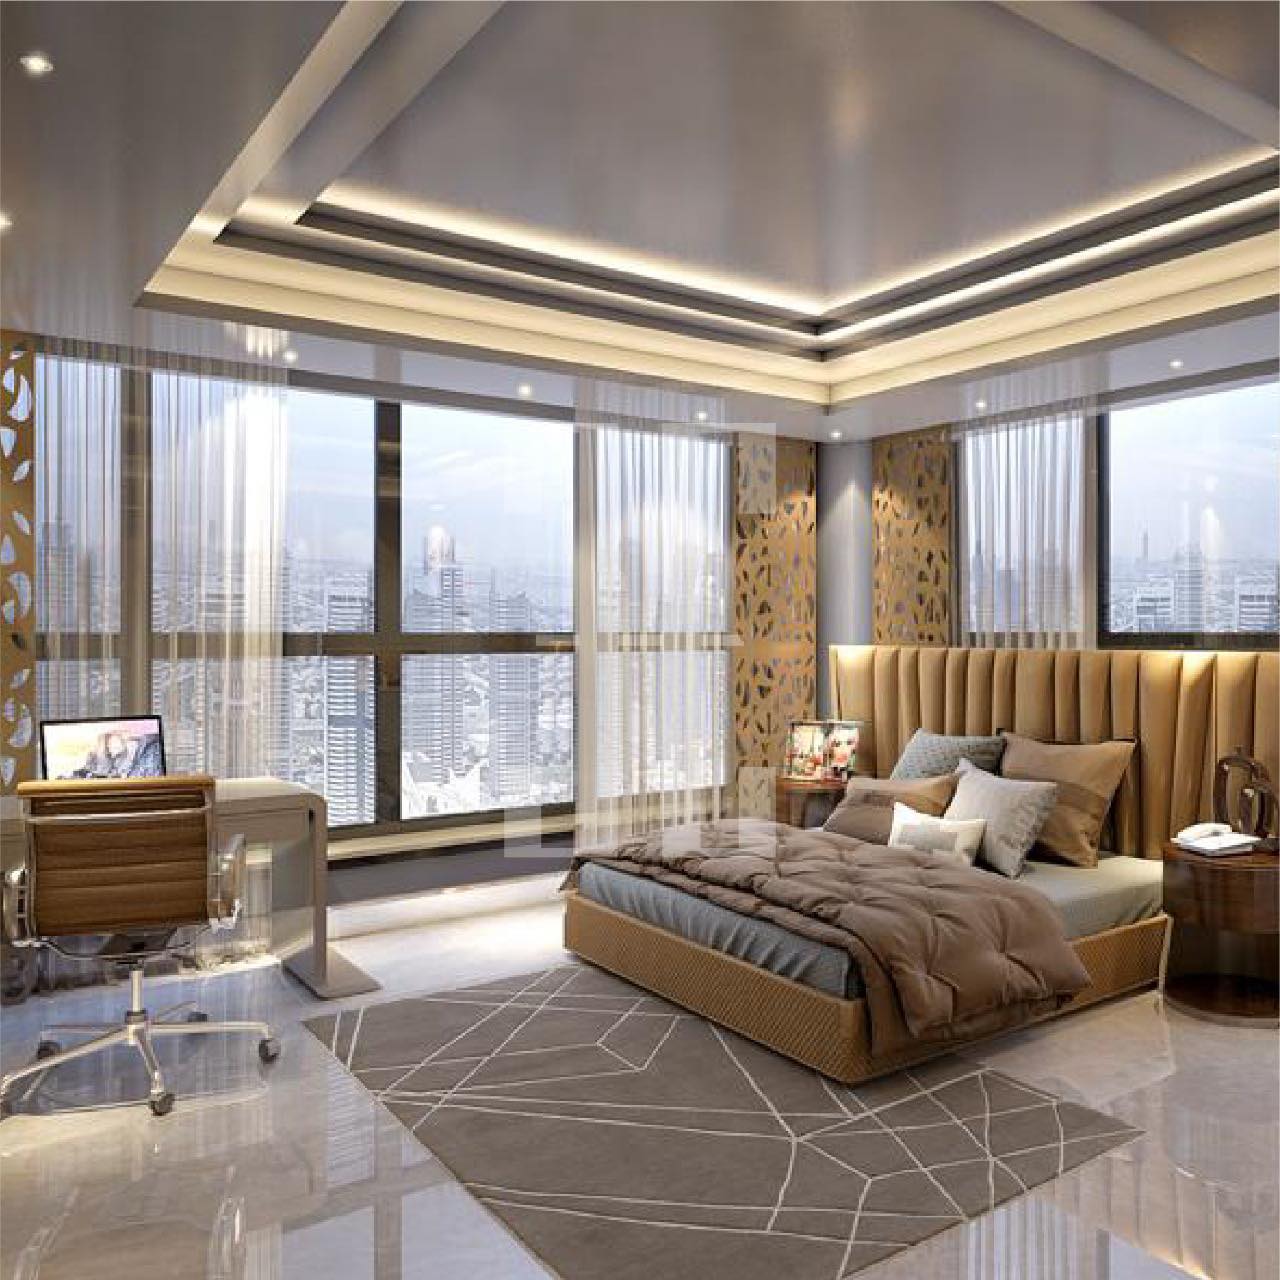 One of the top interior designers & fit-out services providers in Dubai